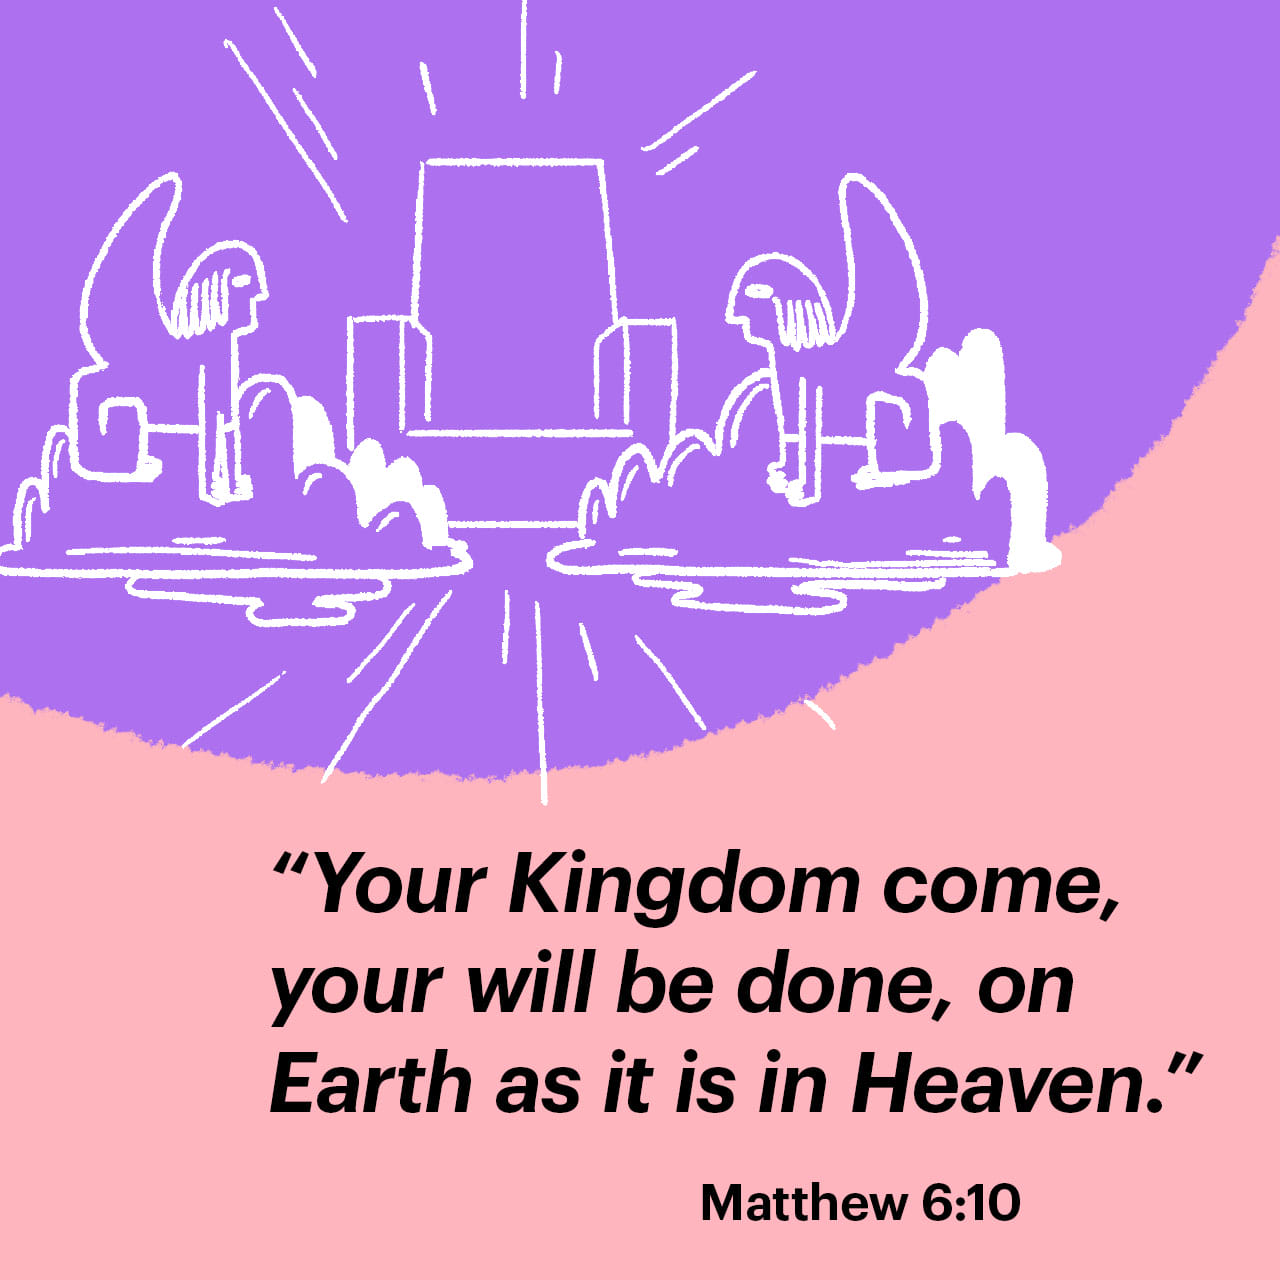 Matthew 6:10 Thy kingdom come. Thy will be done in earth, as it is in heaven. | King James Version (KJV) | Download The Bible App Now